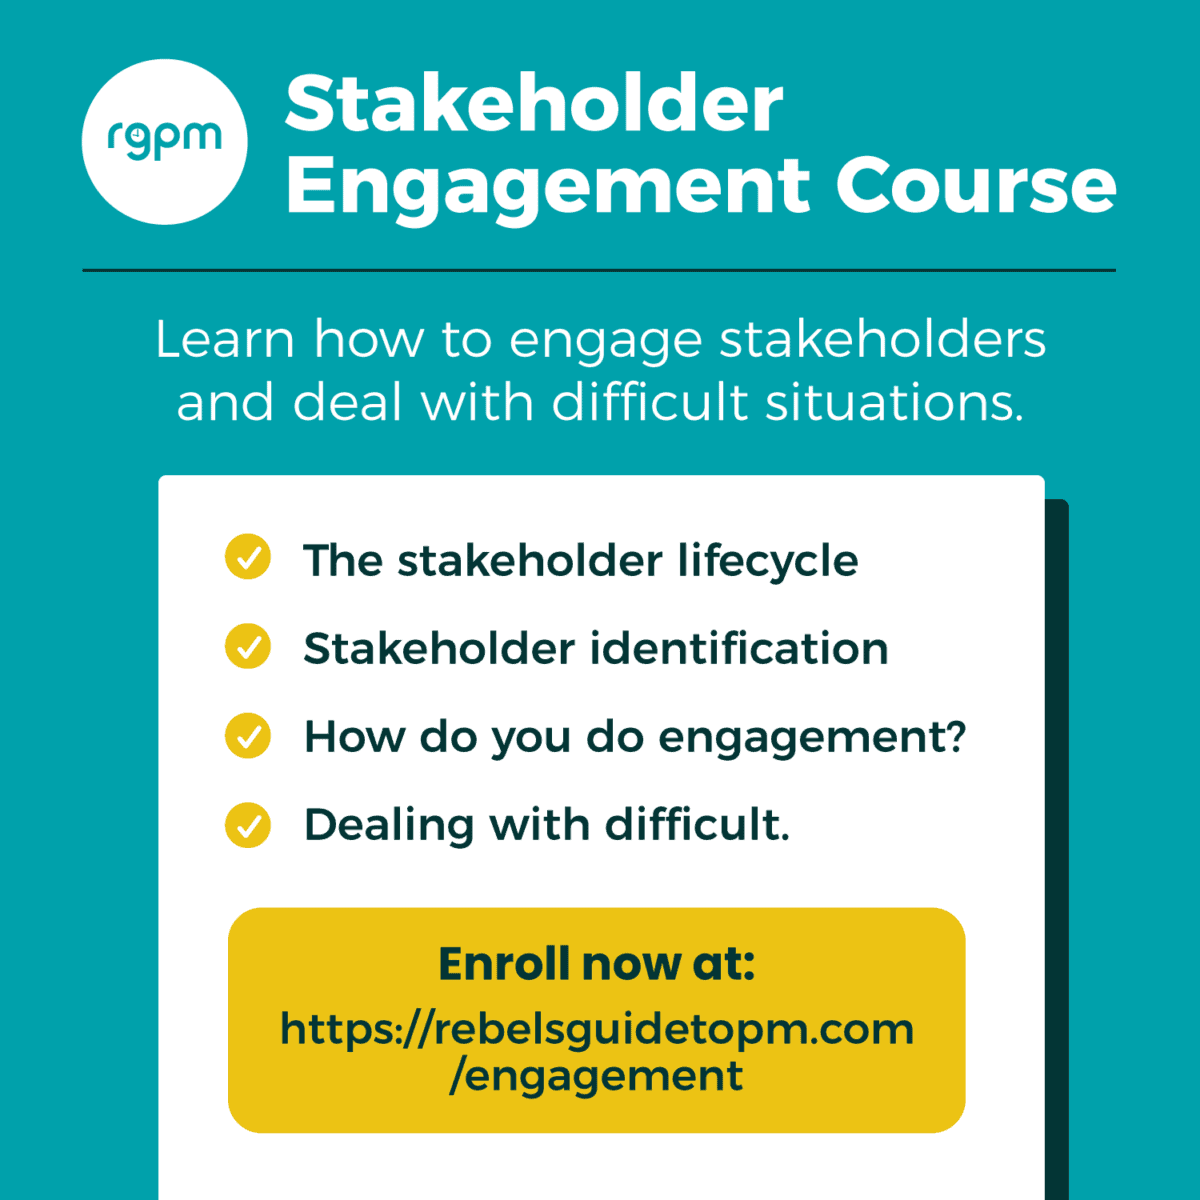 Stakeholder engagement course